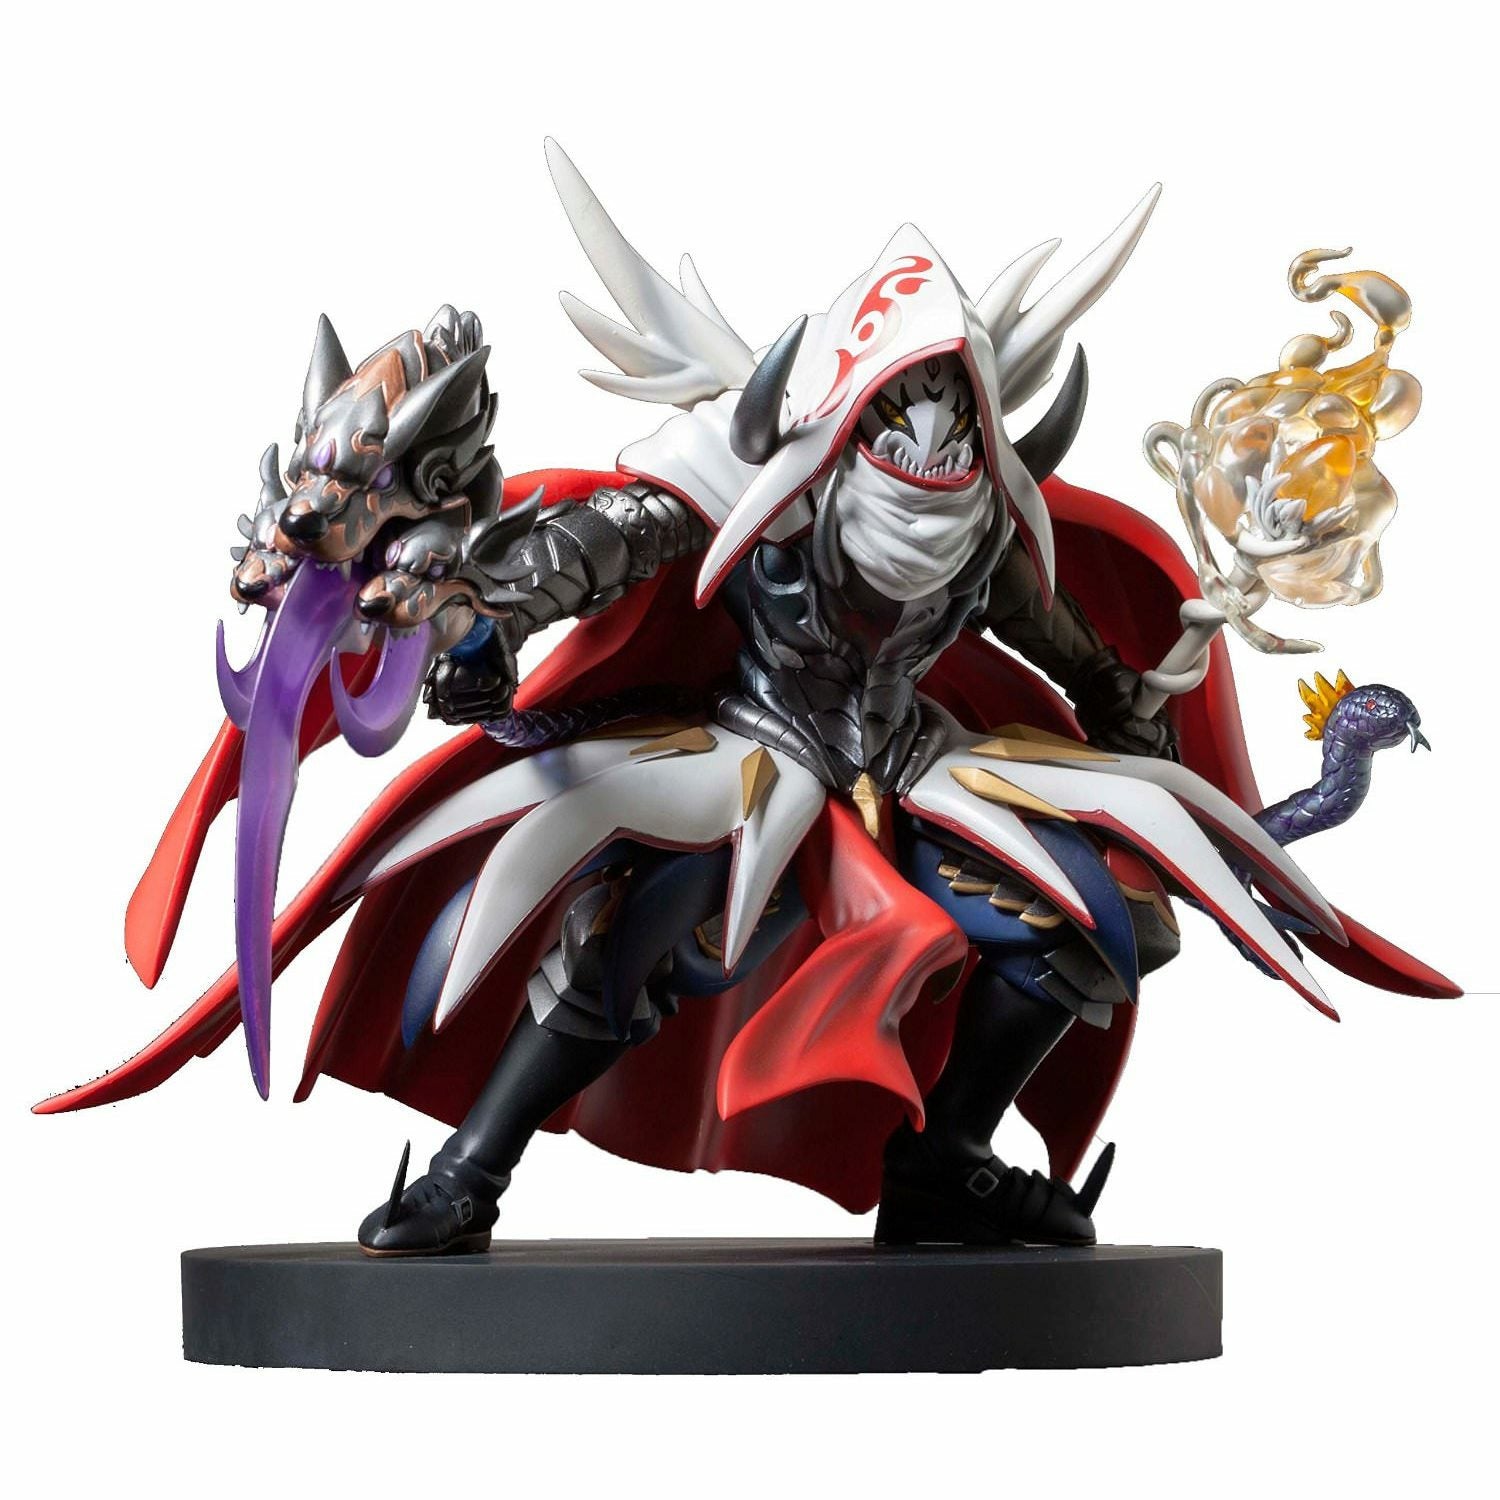 Puzzle & Dragons Underworld God Ark Hades Ultimate Modeling Collection Figure